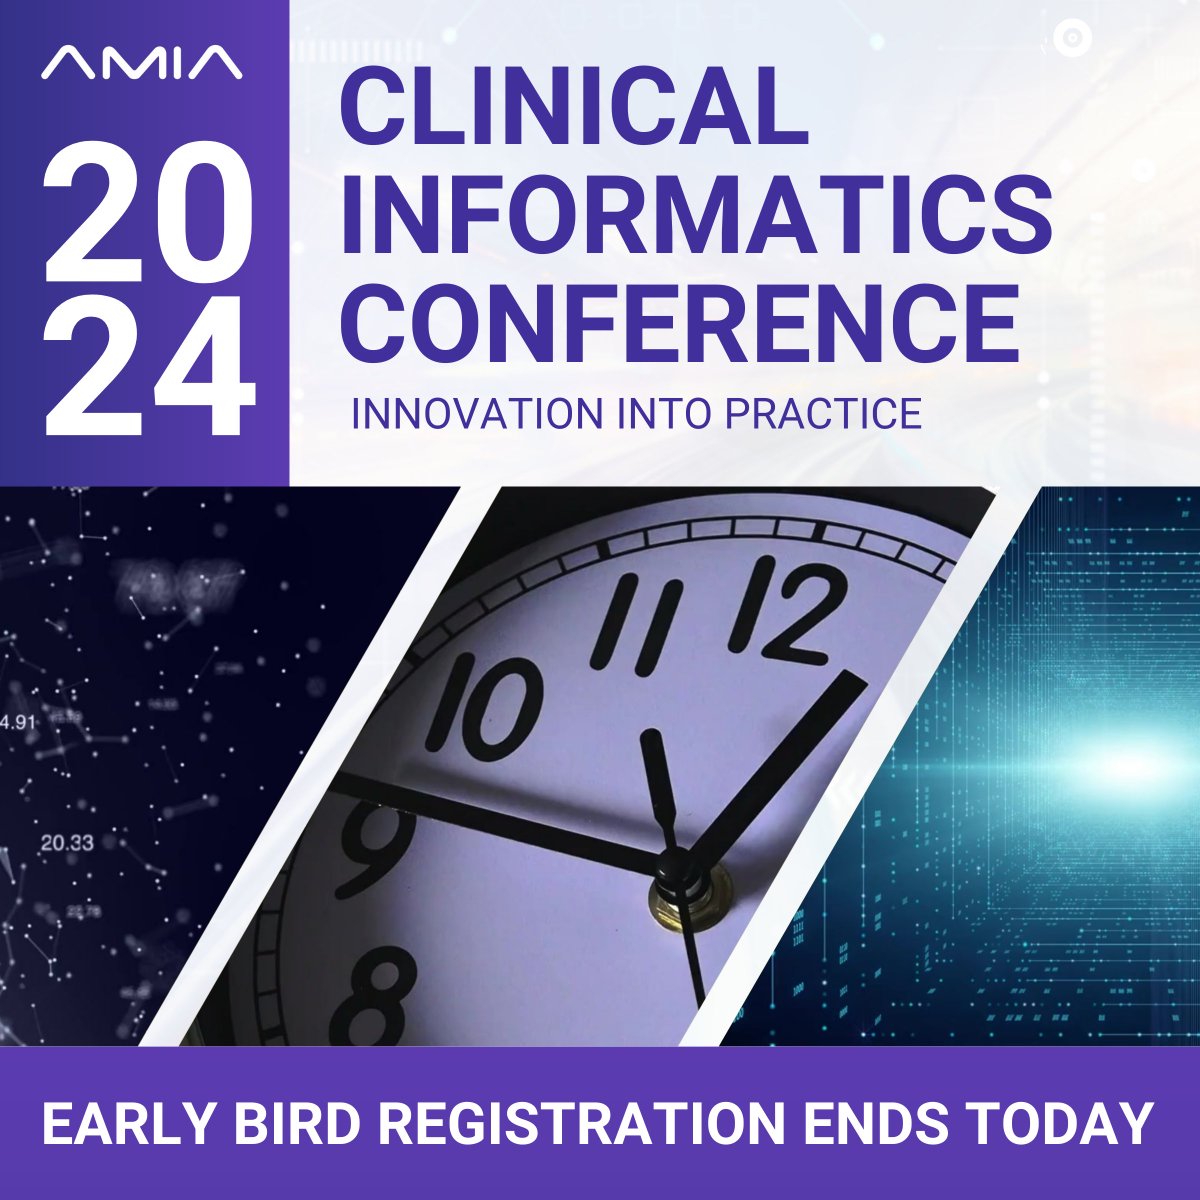 The clock is ticking on early bird rates for CIC. Register today - savings end at midnight. ⏰ CIC is where future-focused ideas meet immediate impact on patient care. Register now: amia.org/education-even… #CIC24 #EarlyBird #ProfessionalDevelopment #HealthInformatics